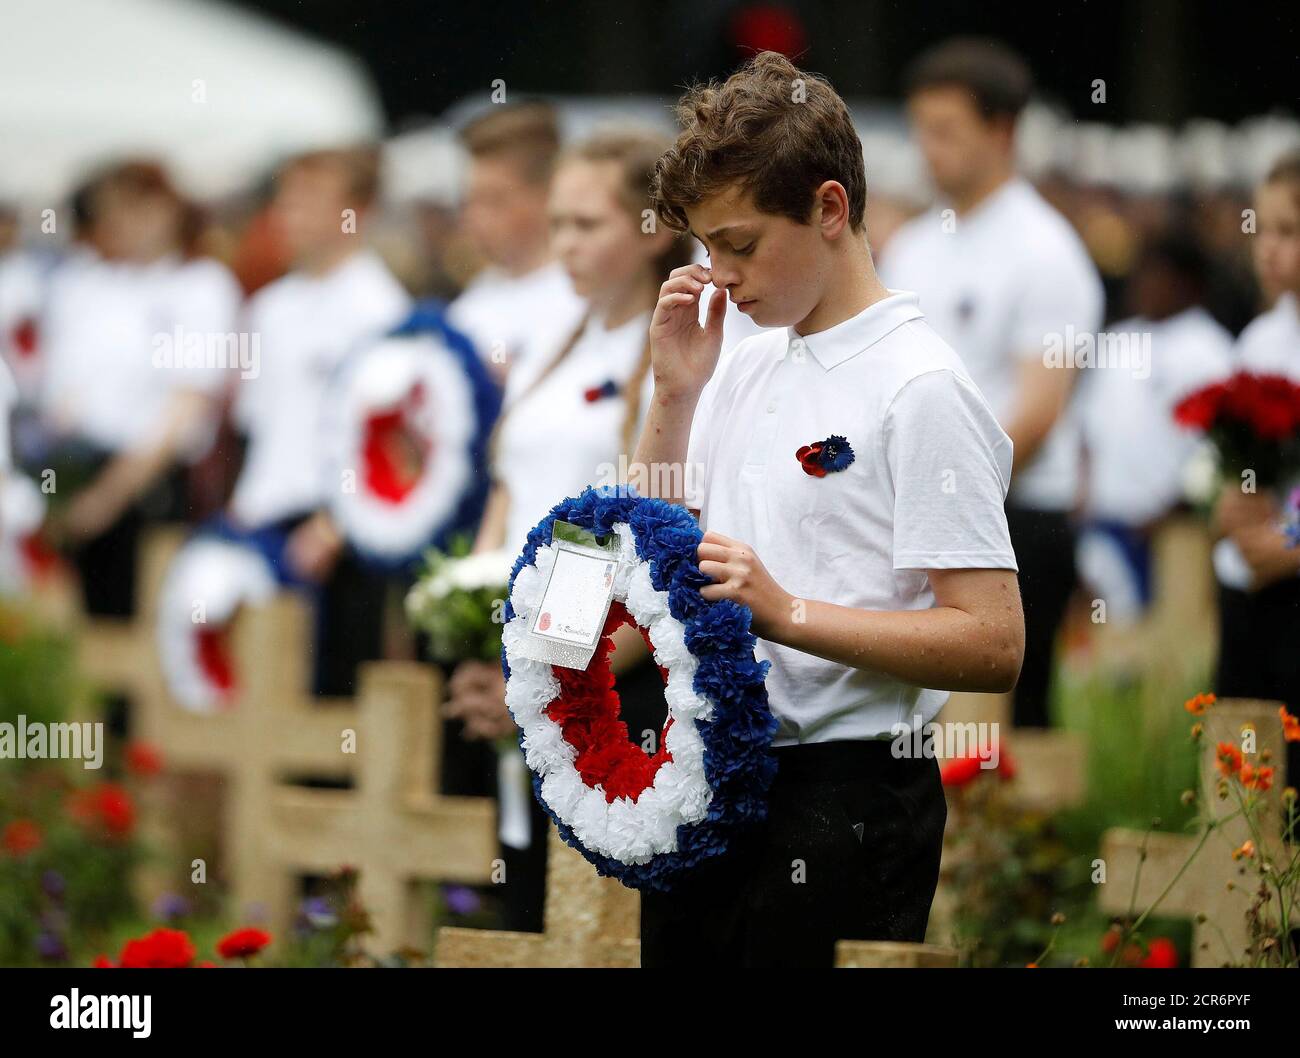 School children hold wreaths as they attend a commemoration event at the Thiepval memorial to mark the 100th anniversary of the Battle of the Somme in Thiepval, northern France July 1, 2016.  REUTERS/Phil Noble Stock Photo